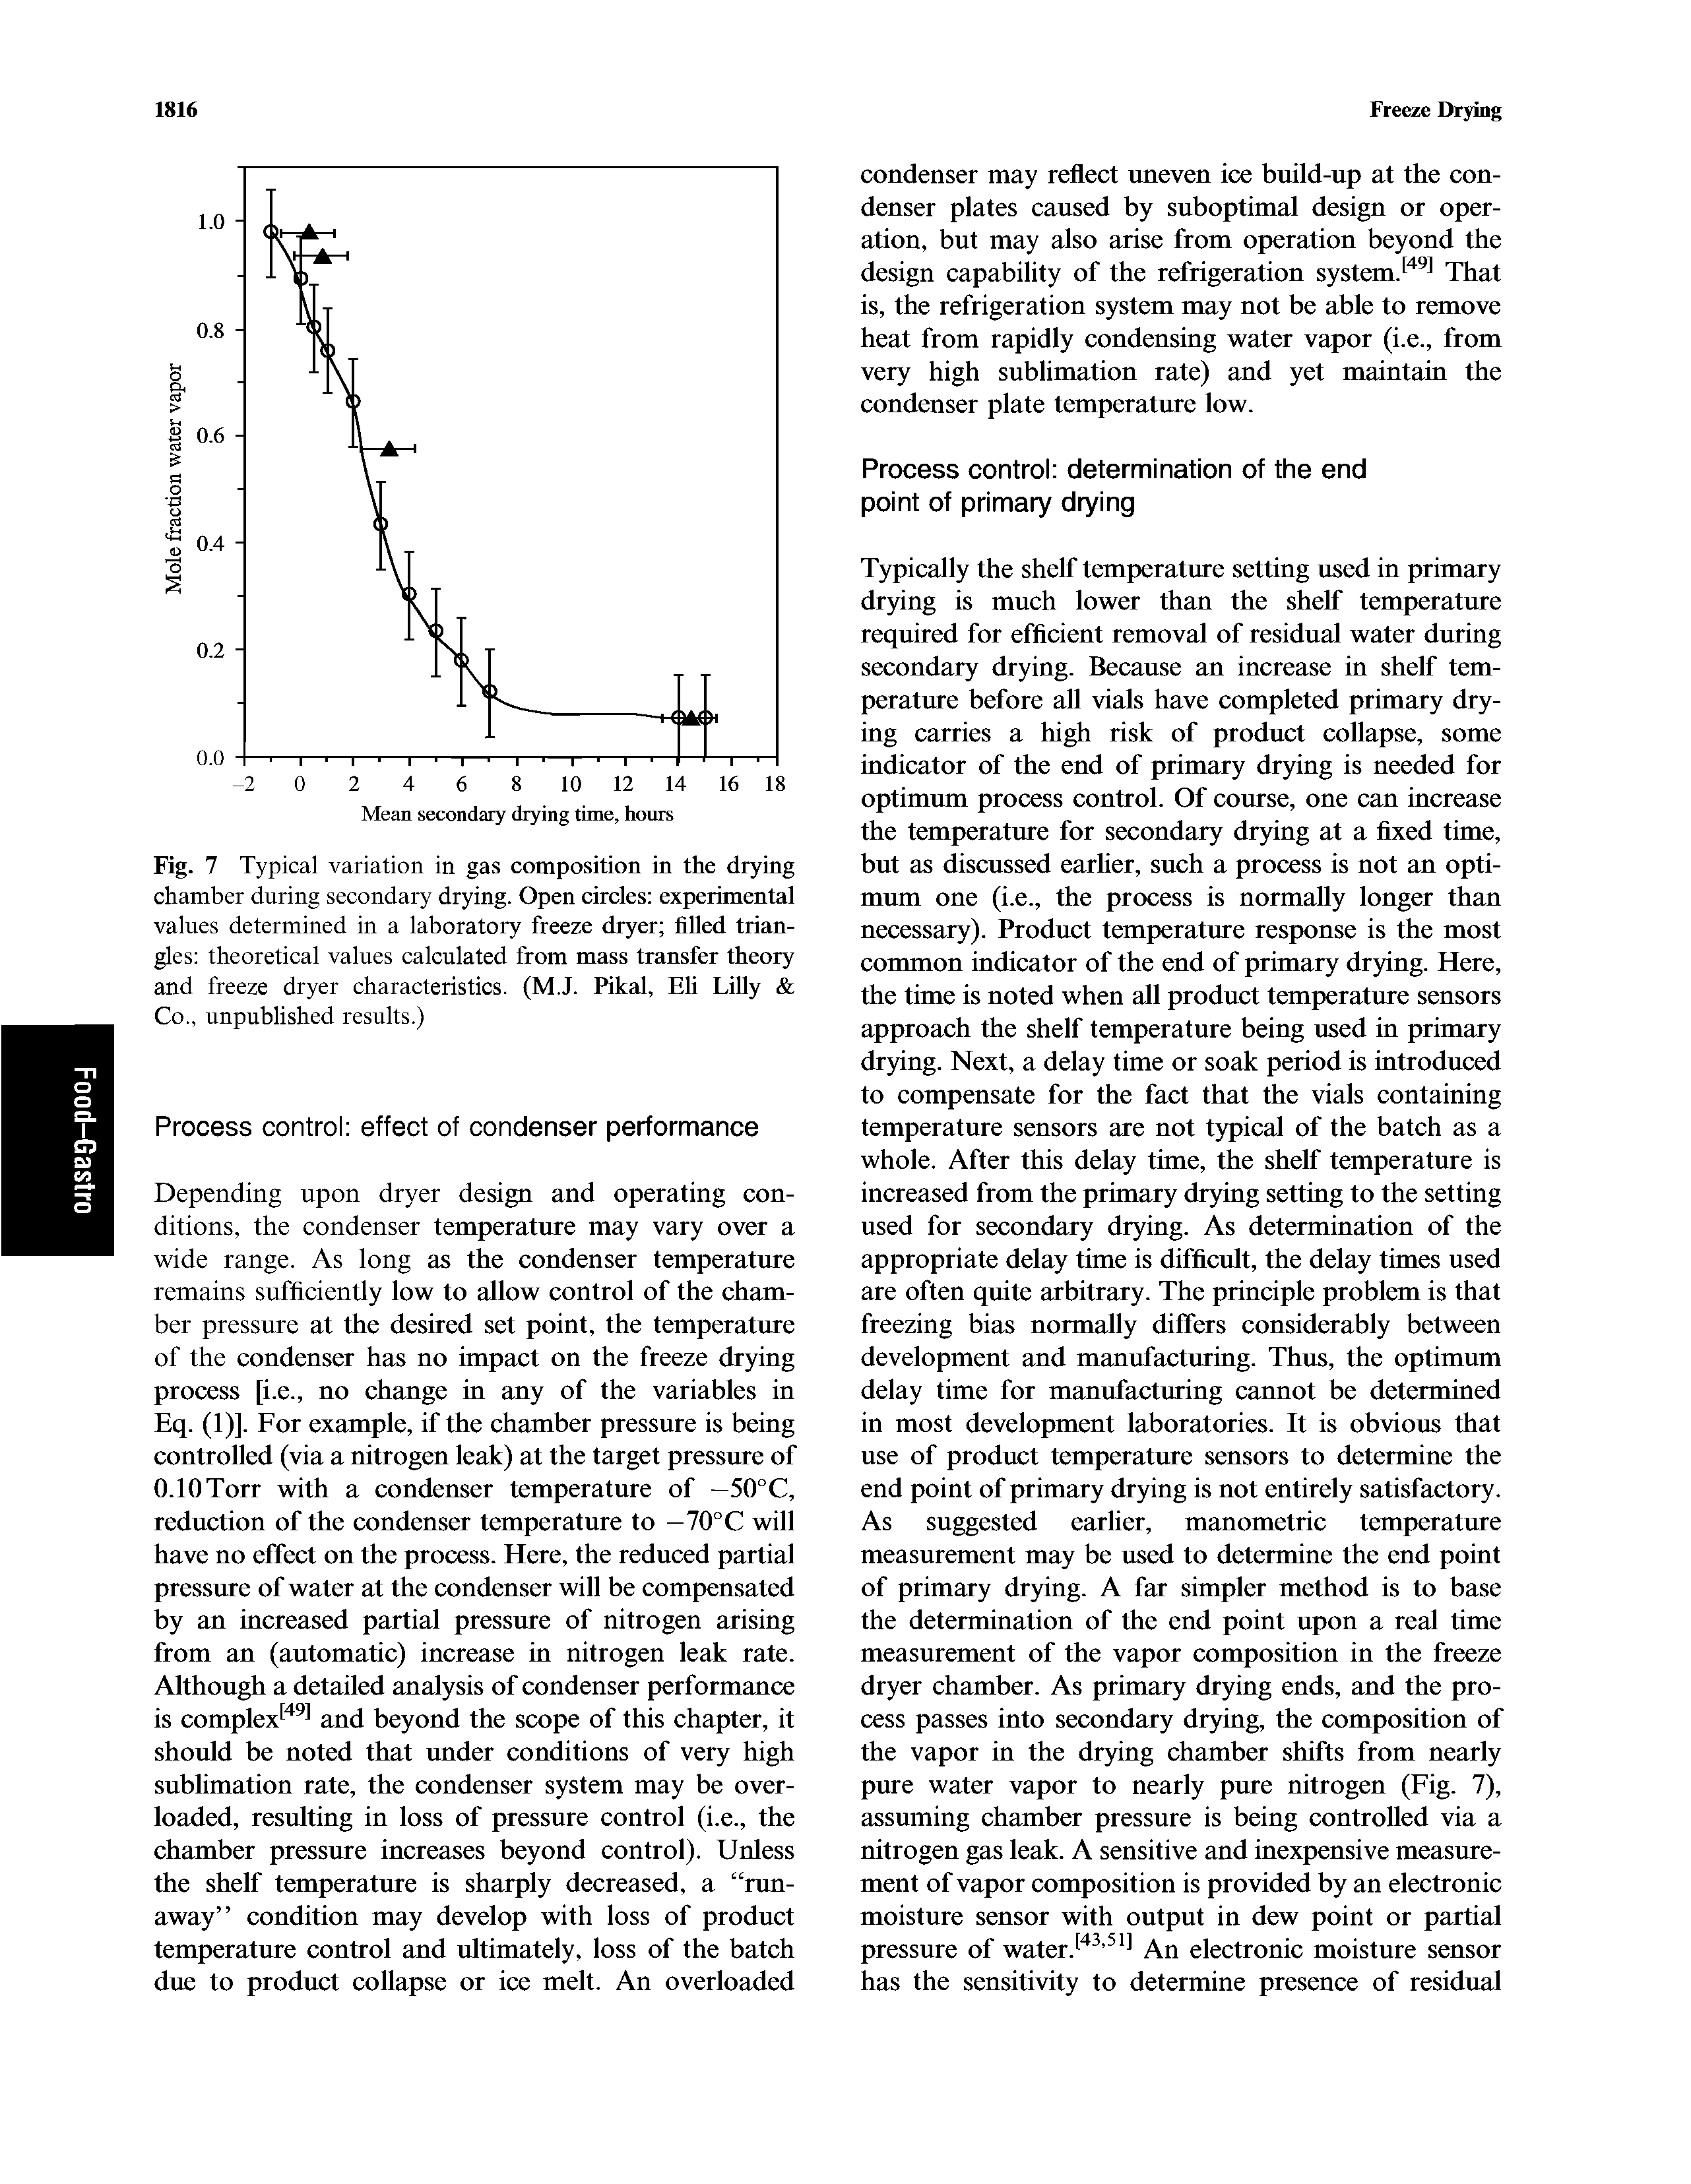 Fig. 7 Typical variation in gas composition in the drying chamber during secondary drying. Open circles experimental values determined in a laboratory freeze dryer filled triangles theoretical values calculated from mass transfer theory and freeze dryer characteristics. (M.J. Pikal, Eli Lilly Co., unpublished results.)...